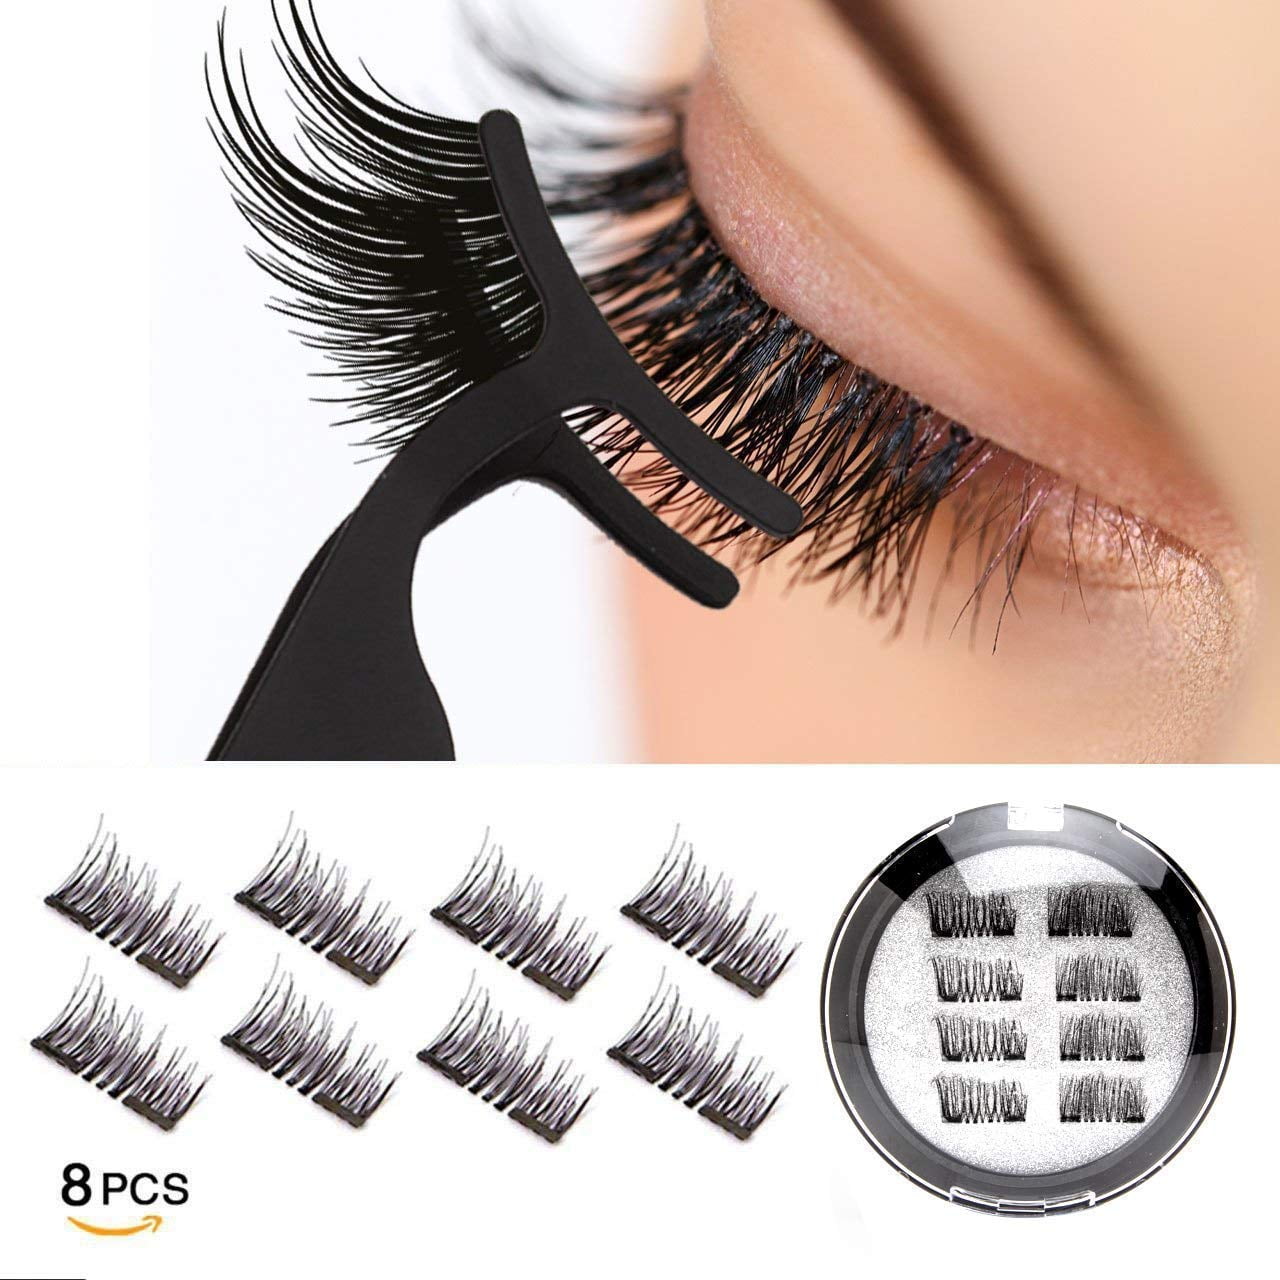 Smuk Begivenhed faktum Dual Magnetic Eyelashes-0.2mm Ultra Thin Magnet-Lightweight & Easy to  Wear-Best 3D Reusable Eyelashes Extensions With Tweezers (8 Pcs) -  Walmart.com